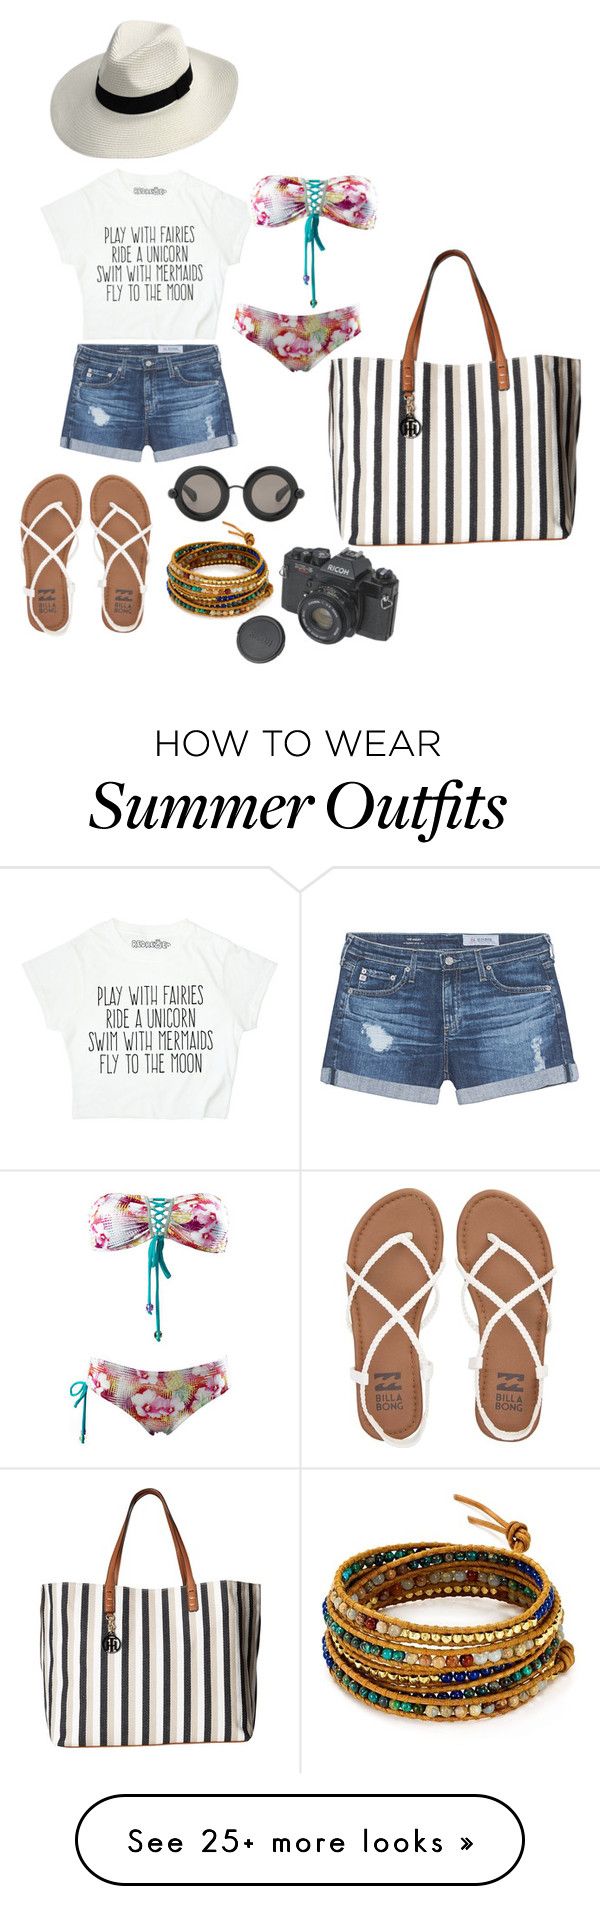 "summer in style" by muslifa on Polyvore featuring AG Adriano Goldschm...